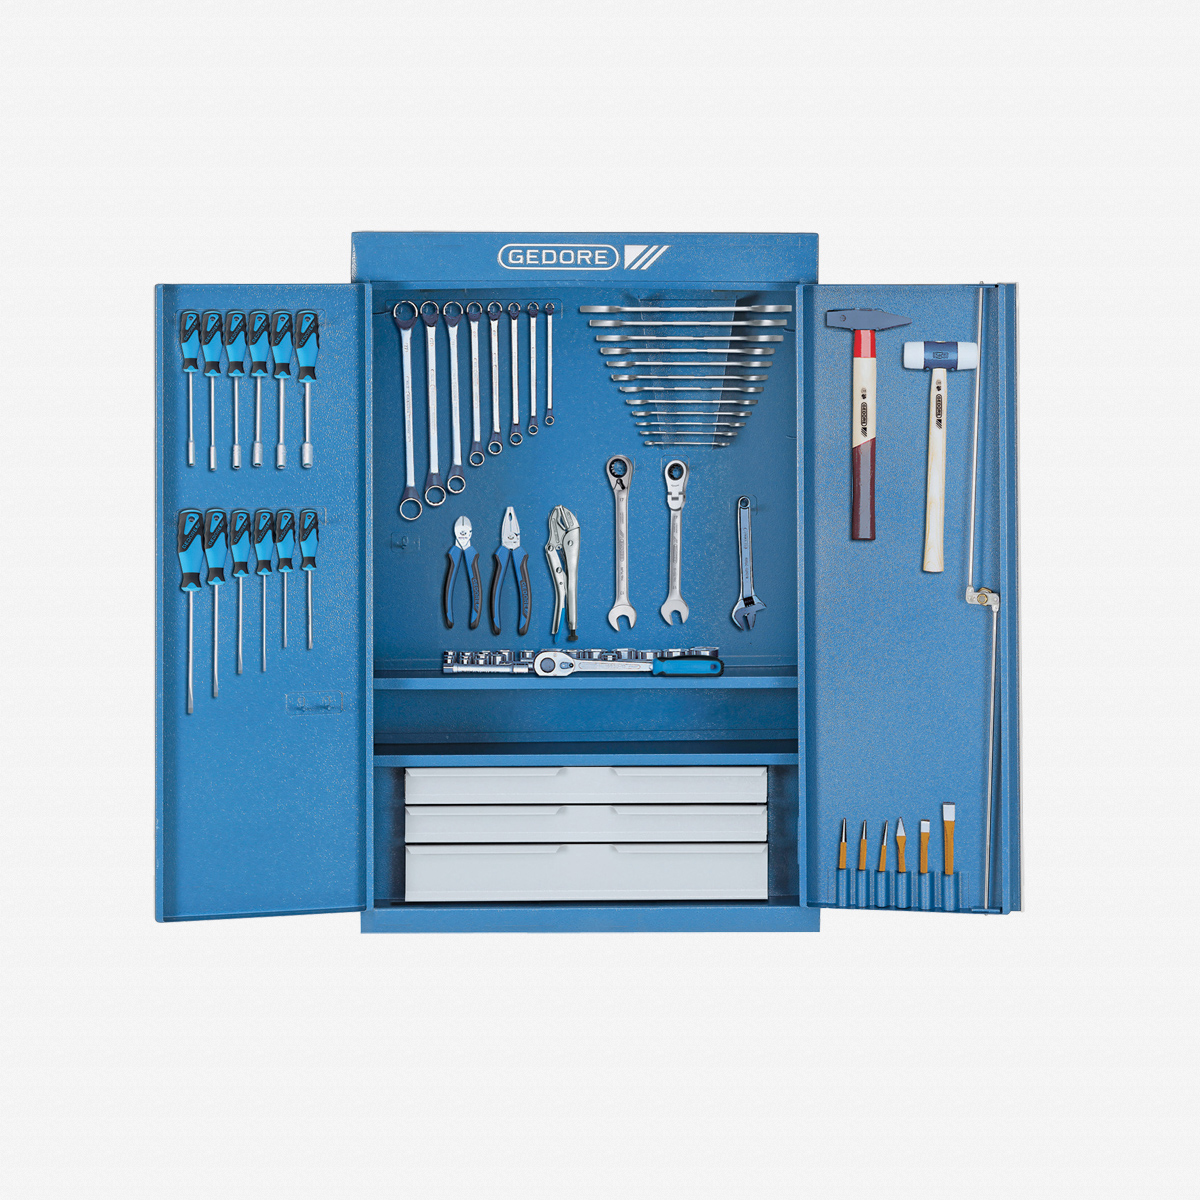 Gedore 1400 G Tool cabinet with tool assortment S 1400 G - KC Tool